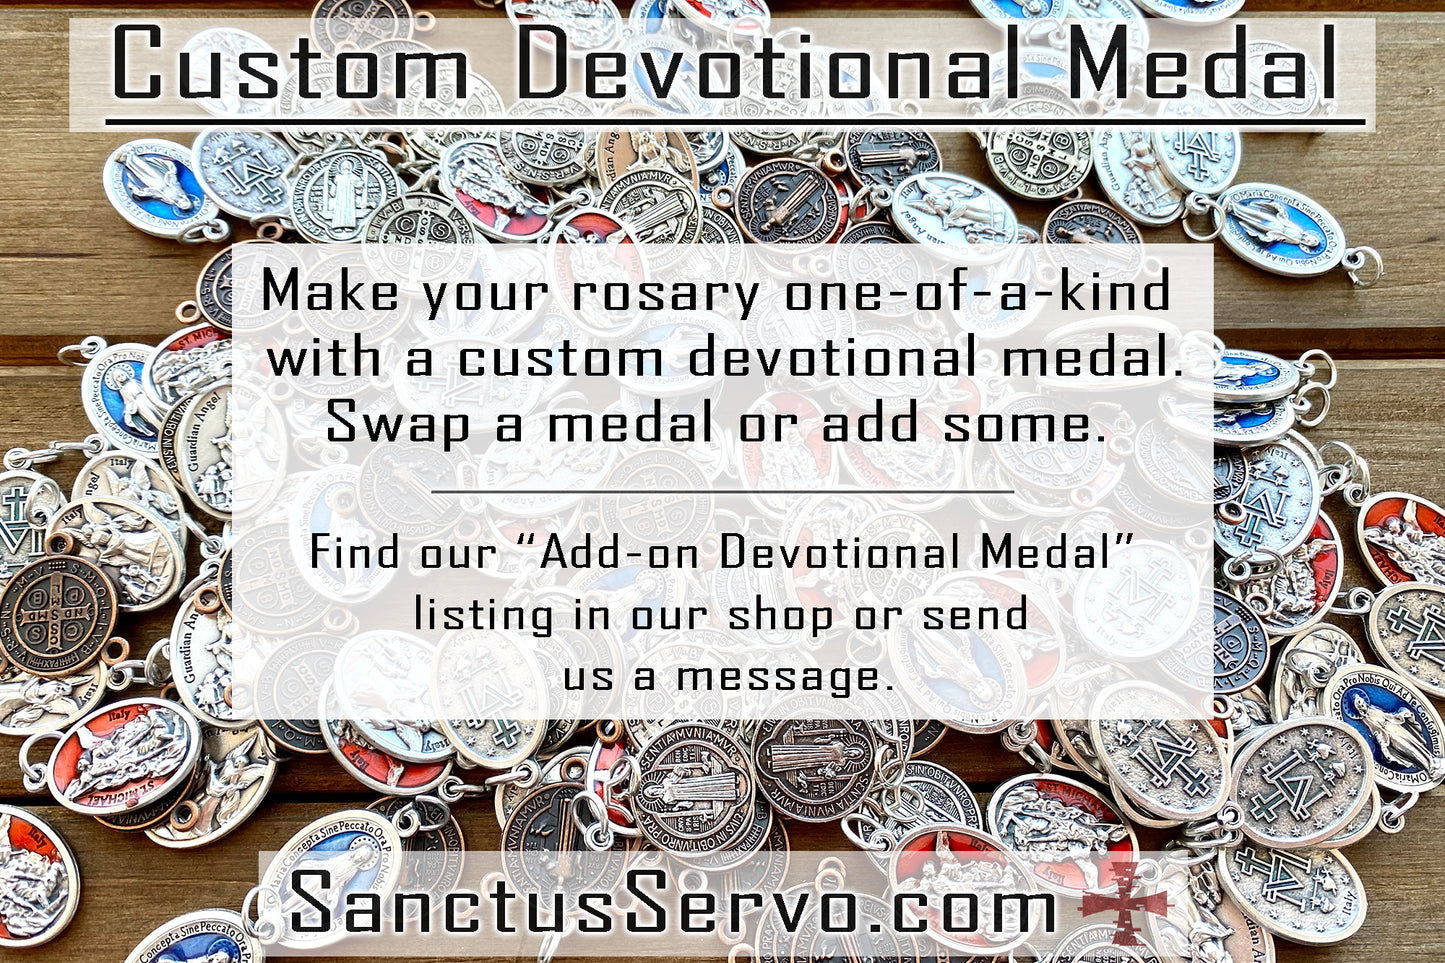 Add an unbreakable paracord rosary with a premium Catholic gift - Devotional Medal for patron saints or holy figures, perfect for deepening your faith and adding personalization to your rosary. Shop now at Sanctus Servo for durable paracord rosaries and unique Catholic accessories!